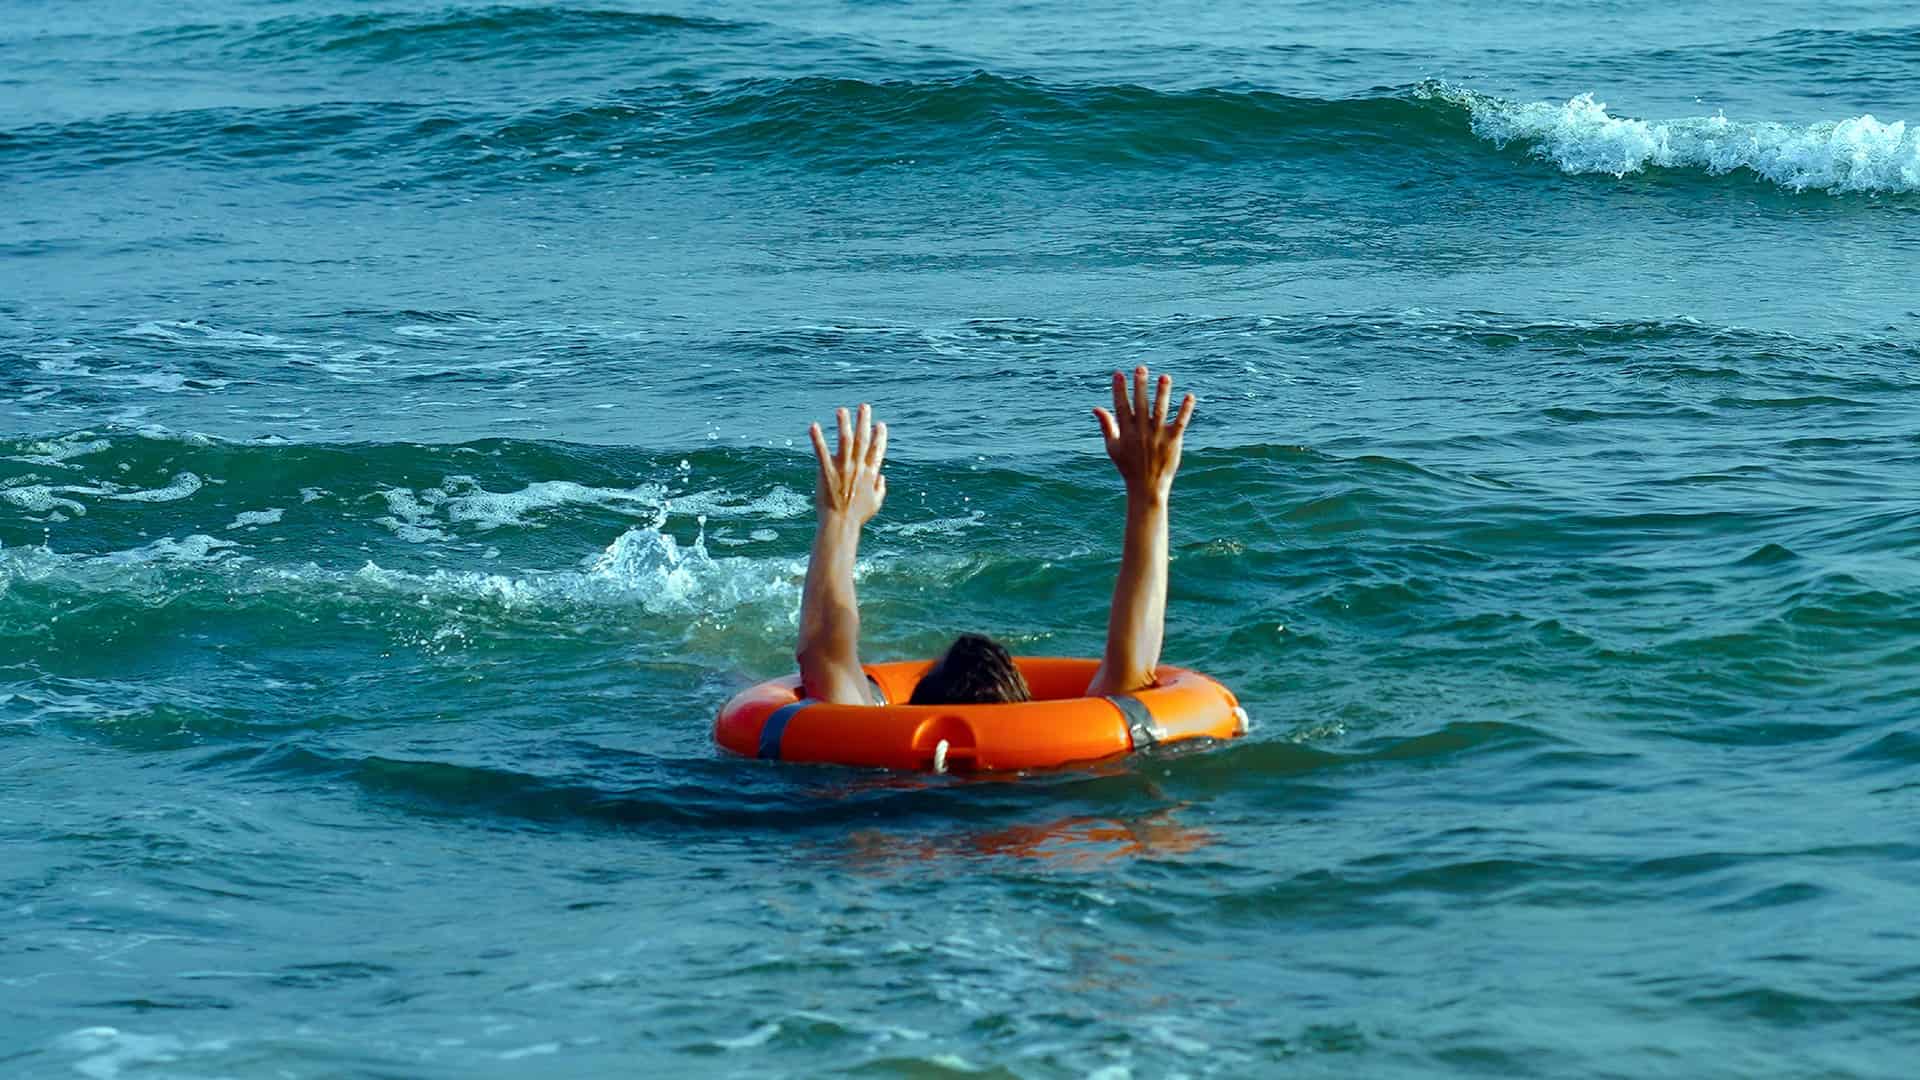 a person holds their hands up through the middle of a rubber lifesaving ring while swimming in relatively calm conditions at a beach.